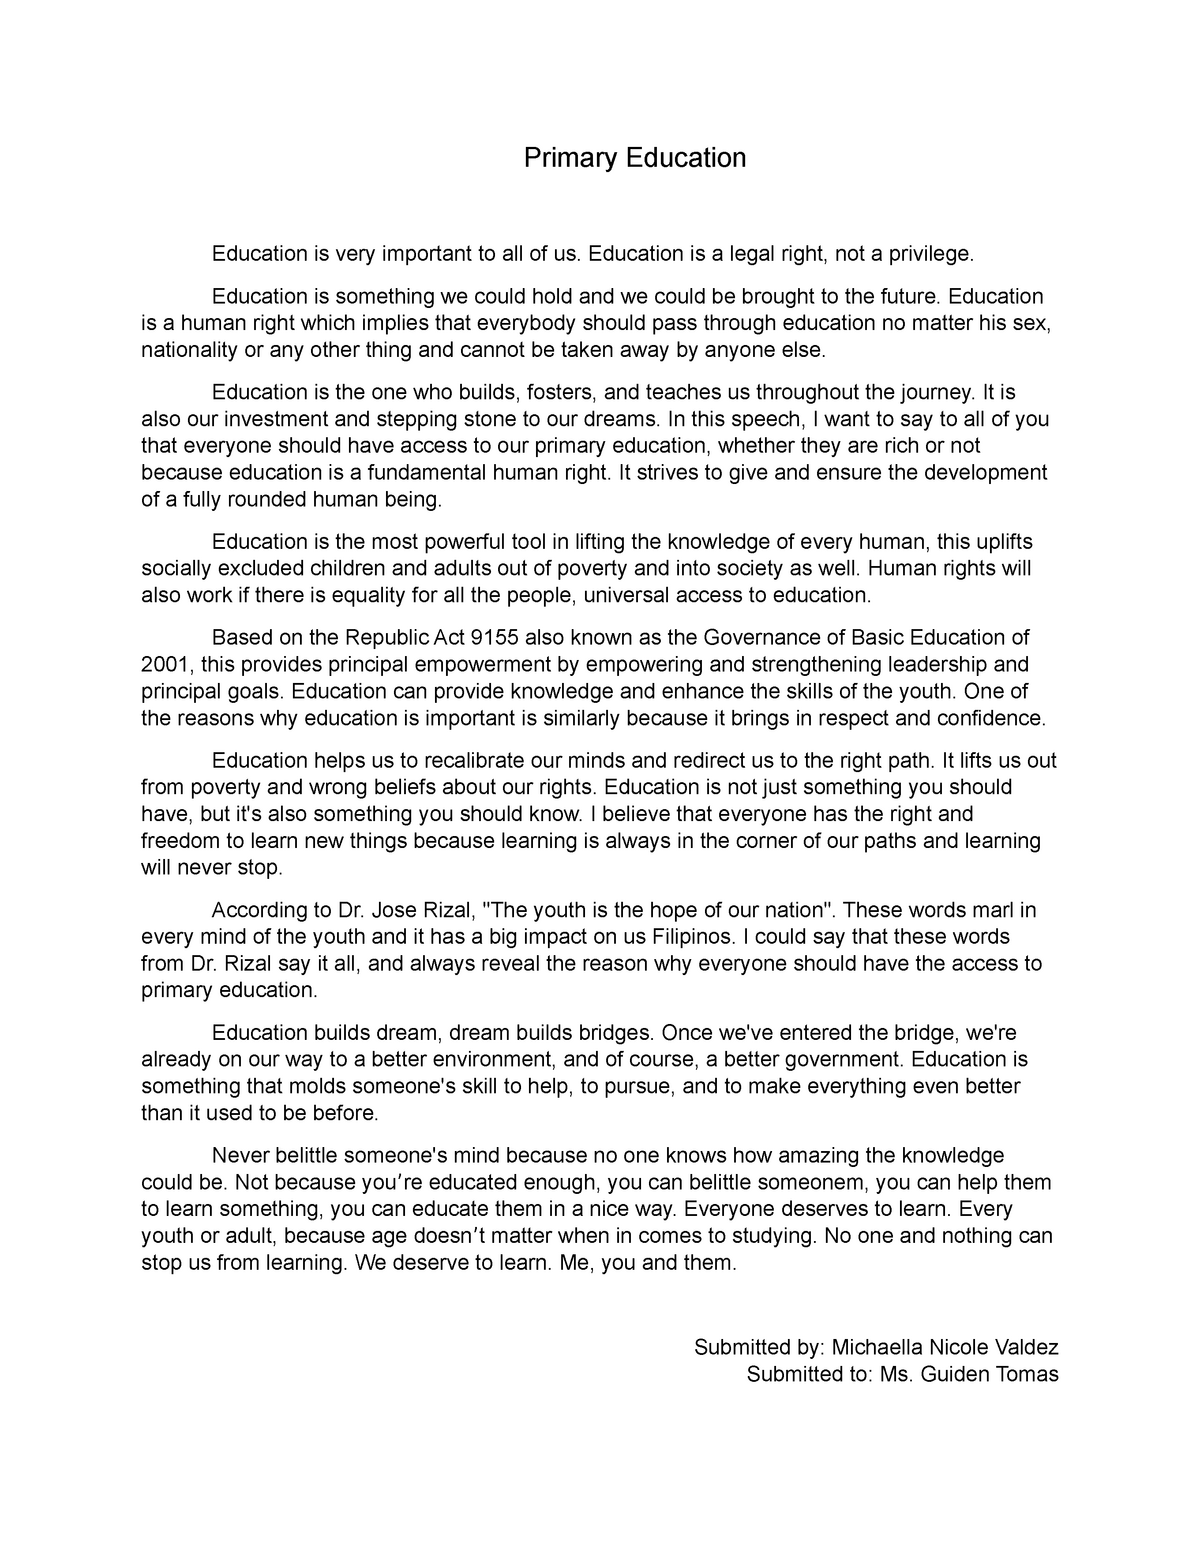 work immersion essay introduction